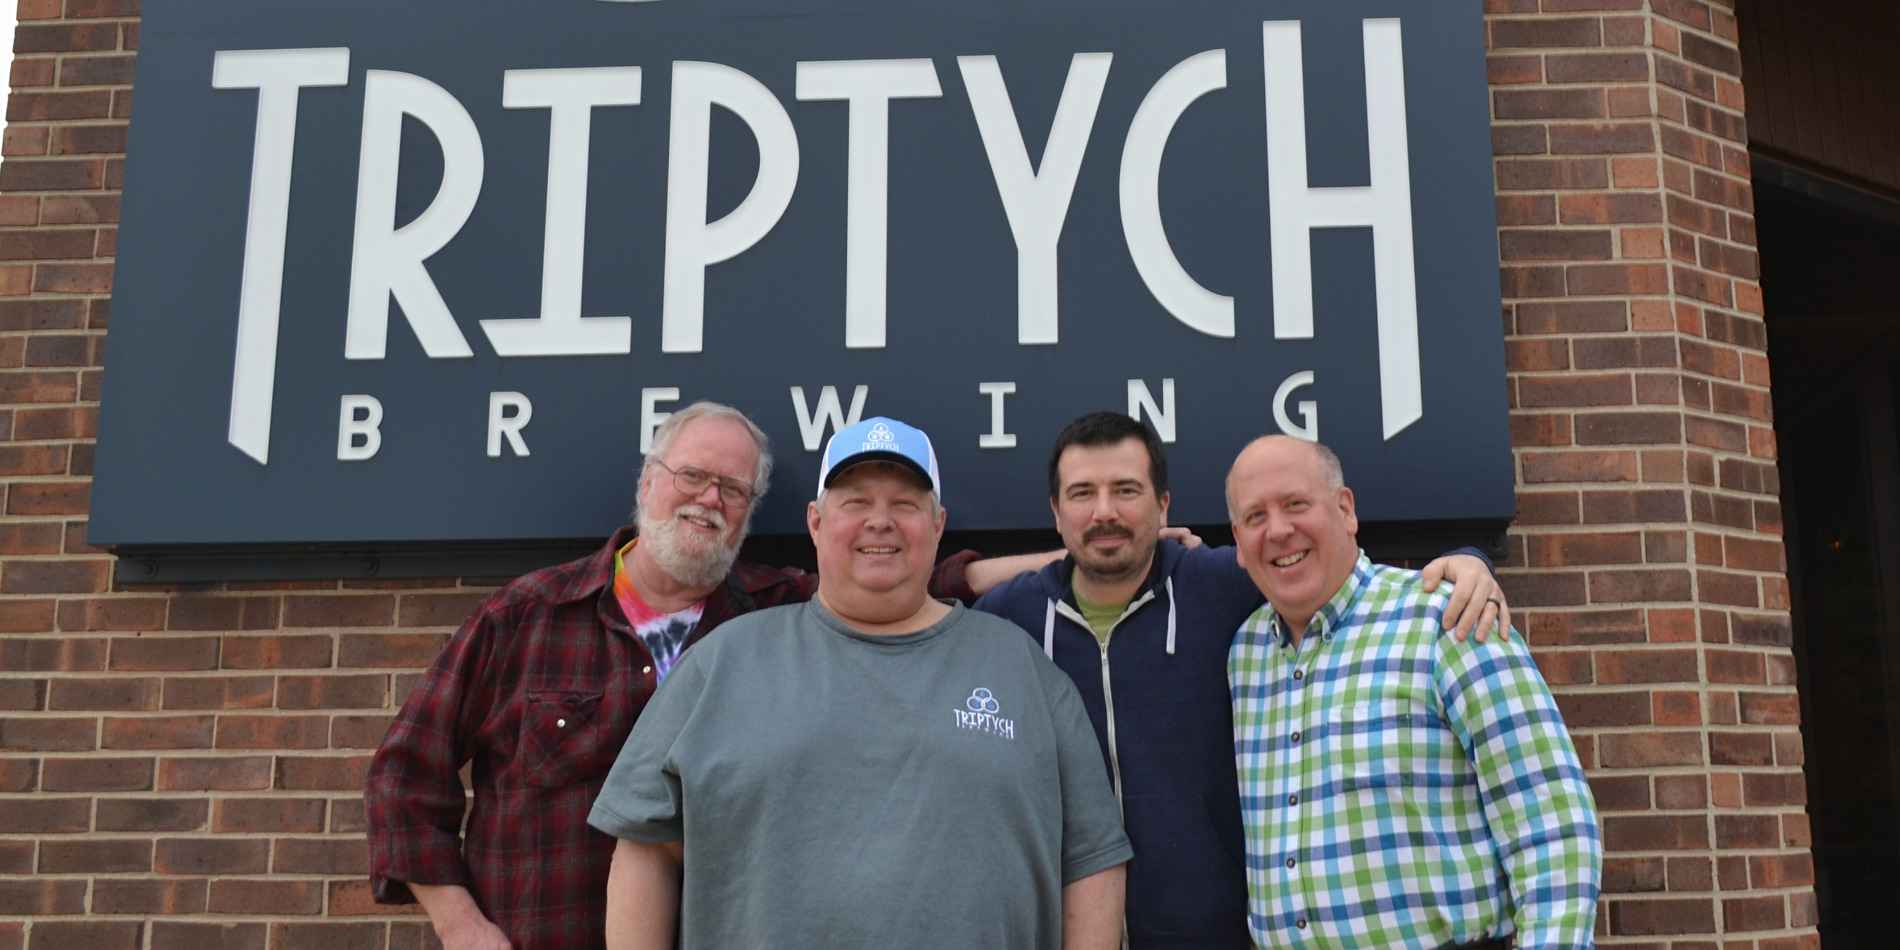 Triptych Brewing and a decade of craft beers